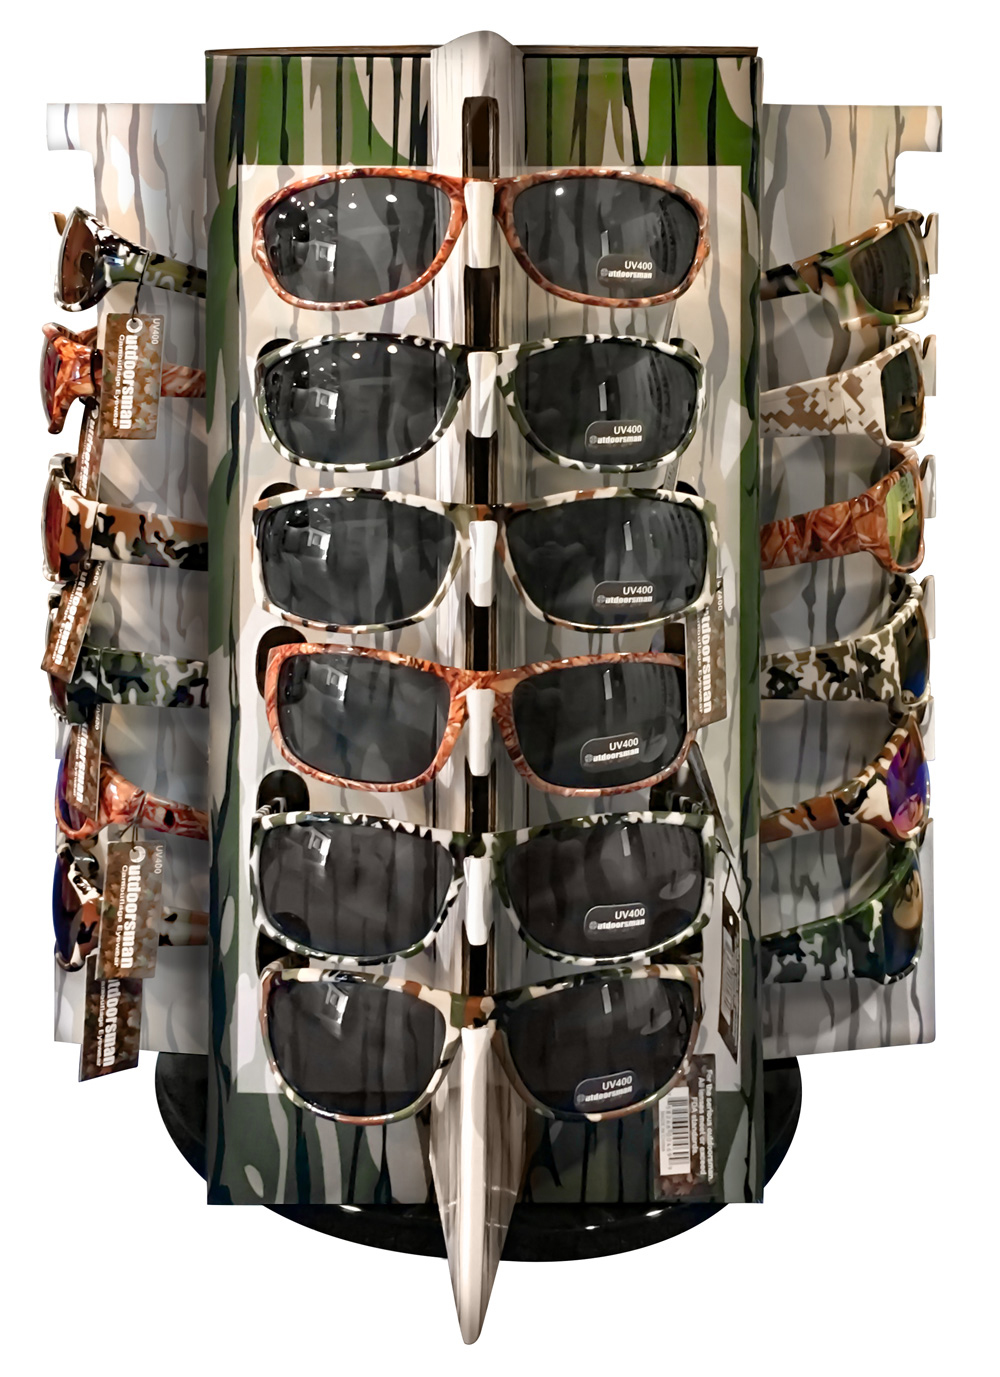 Men's & Women's Camouflage SUNGLASSES w/ Spinning Counter Display